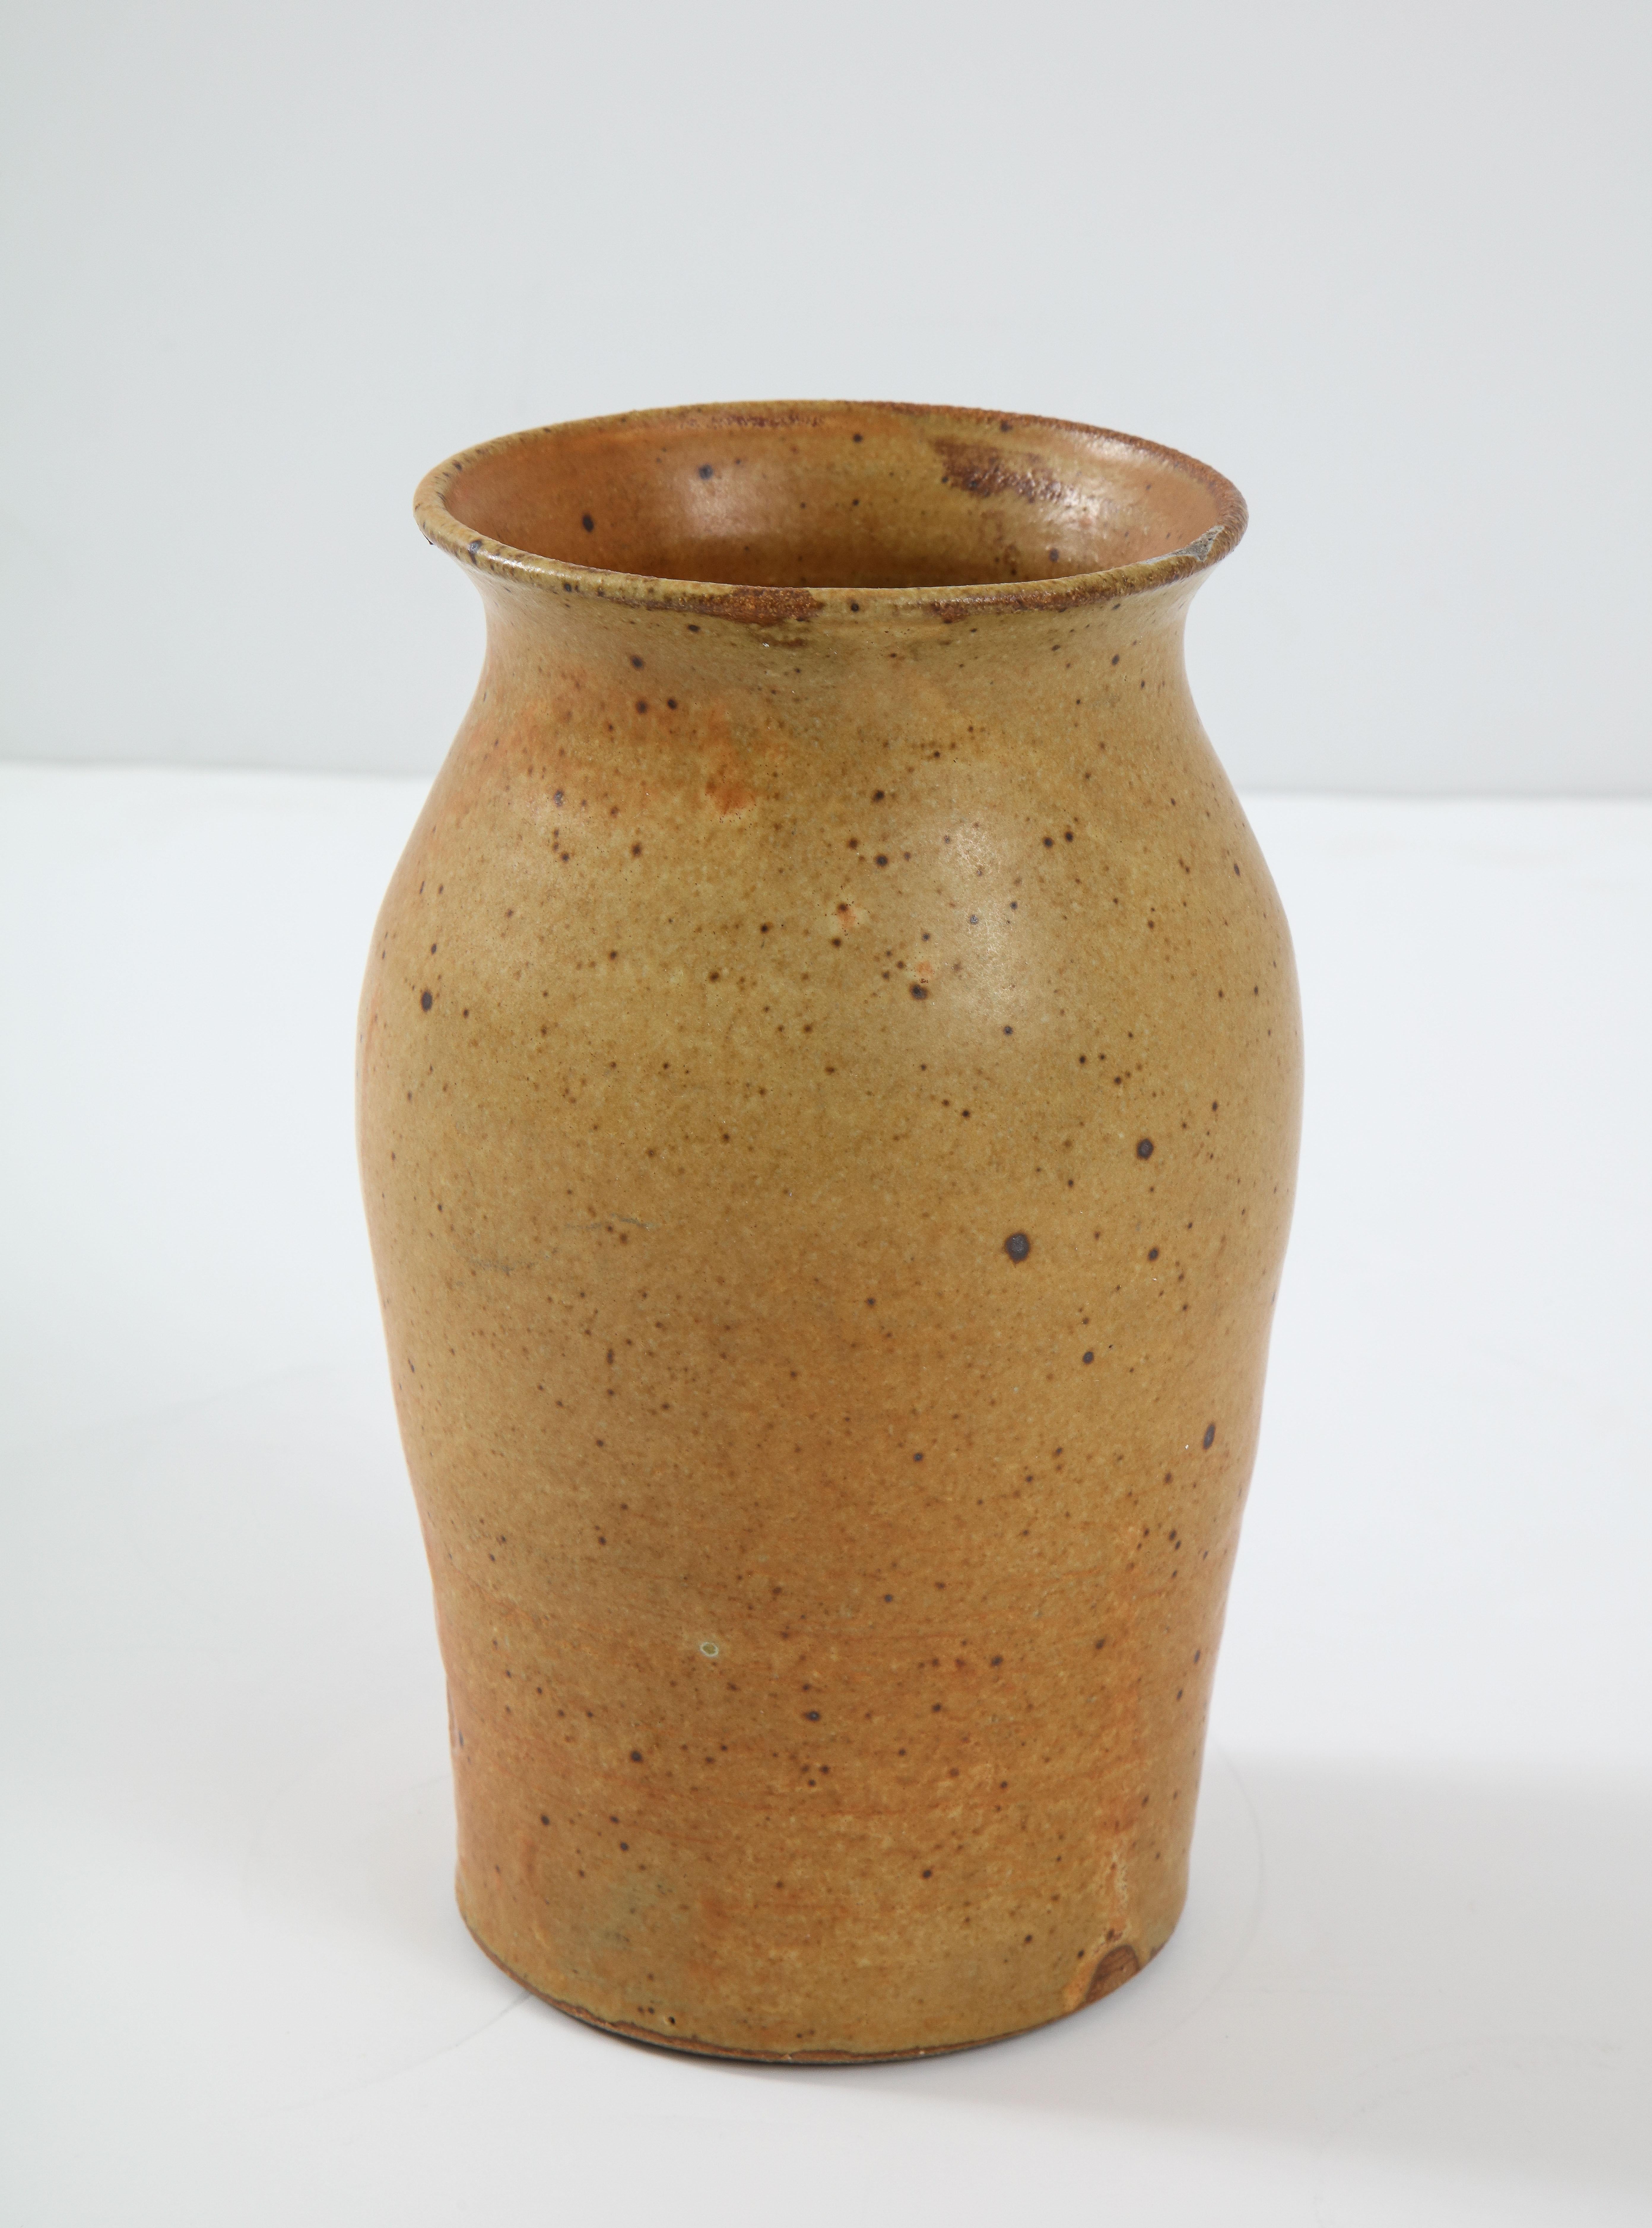 Swedish Ocher Tawny Speckled vase, signed, circa 1950. Two circular marks in the side of the vase indecipherable.